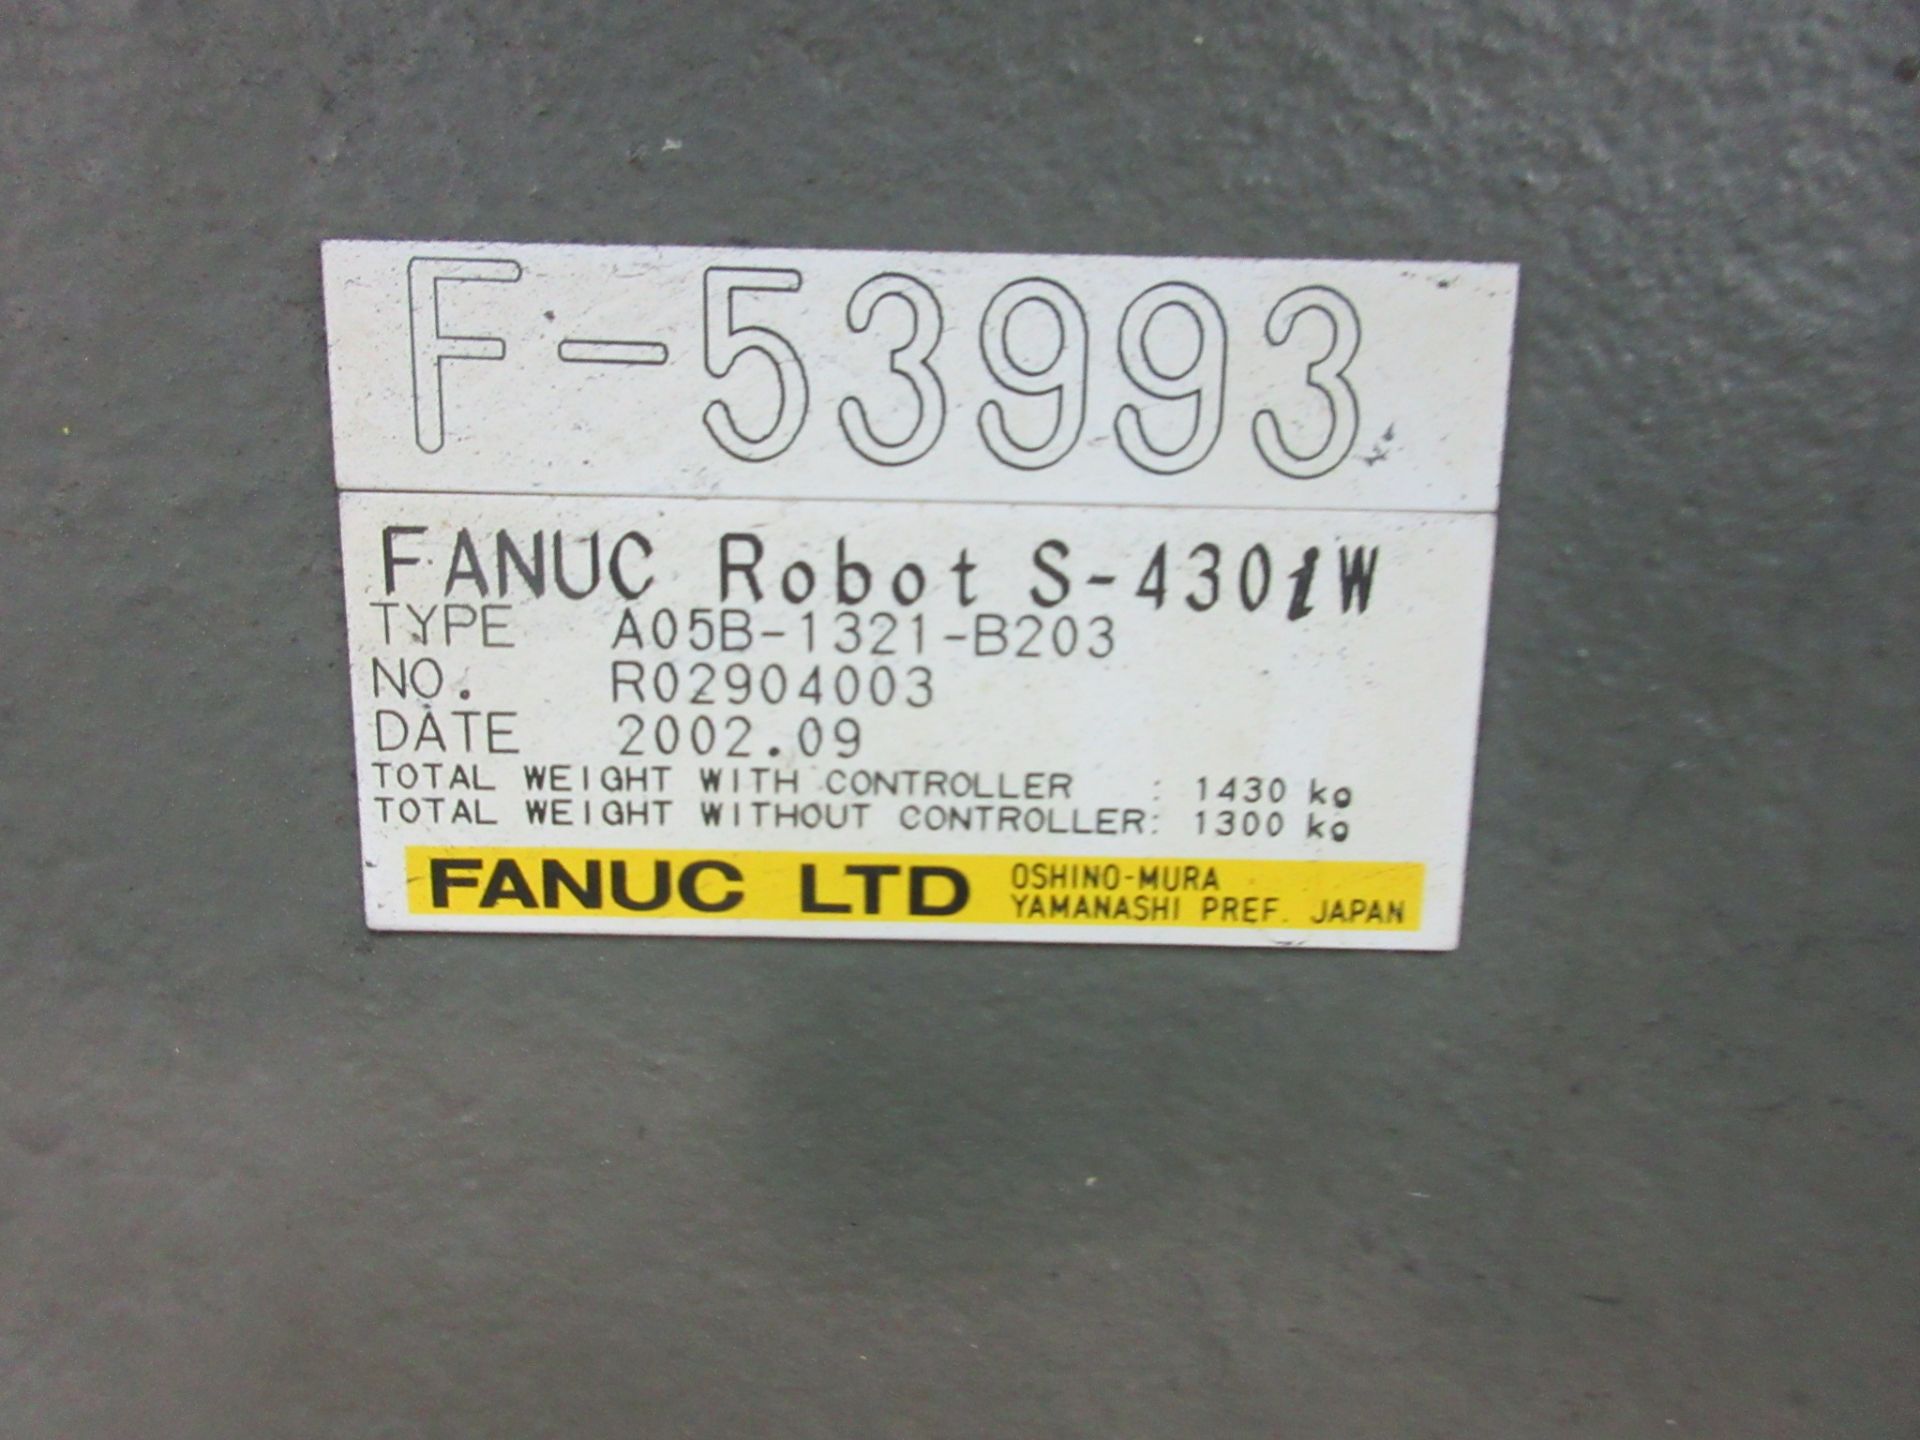 FANUC S-430IW LOADING ROBOT W/ SYSTEM RJ3 ROBOT CONTROLLER, CABLES AND TEACH PENDANT (LOCATED IN - Image 5 of 10